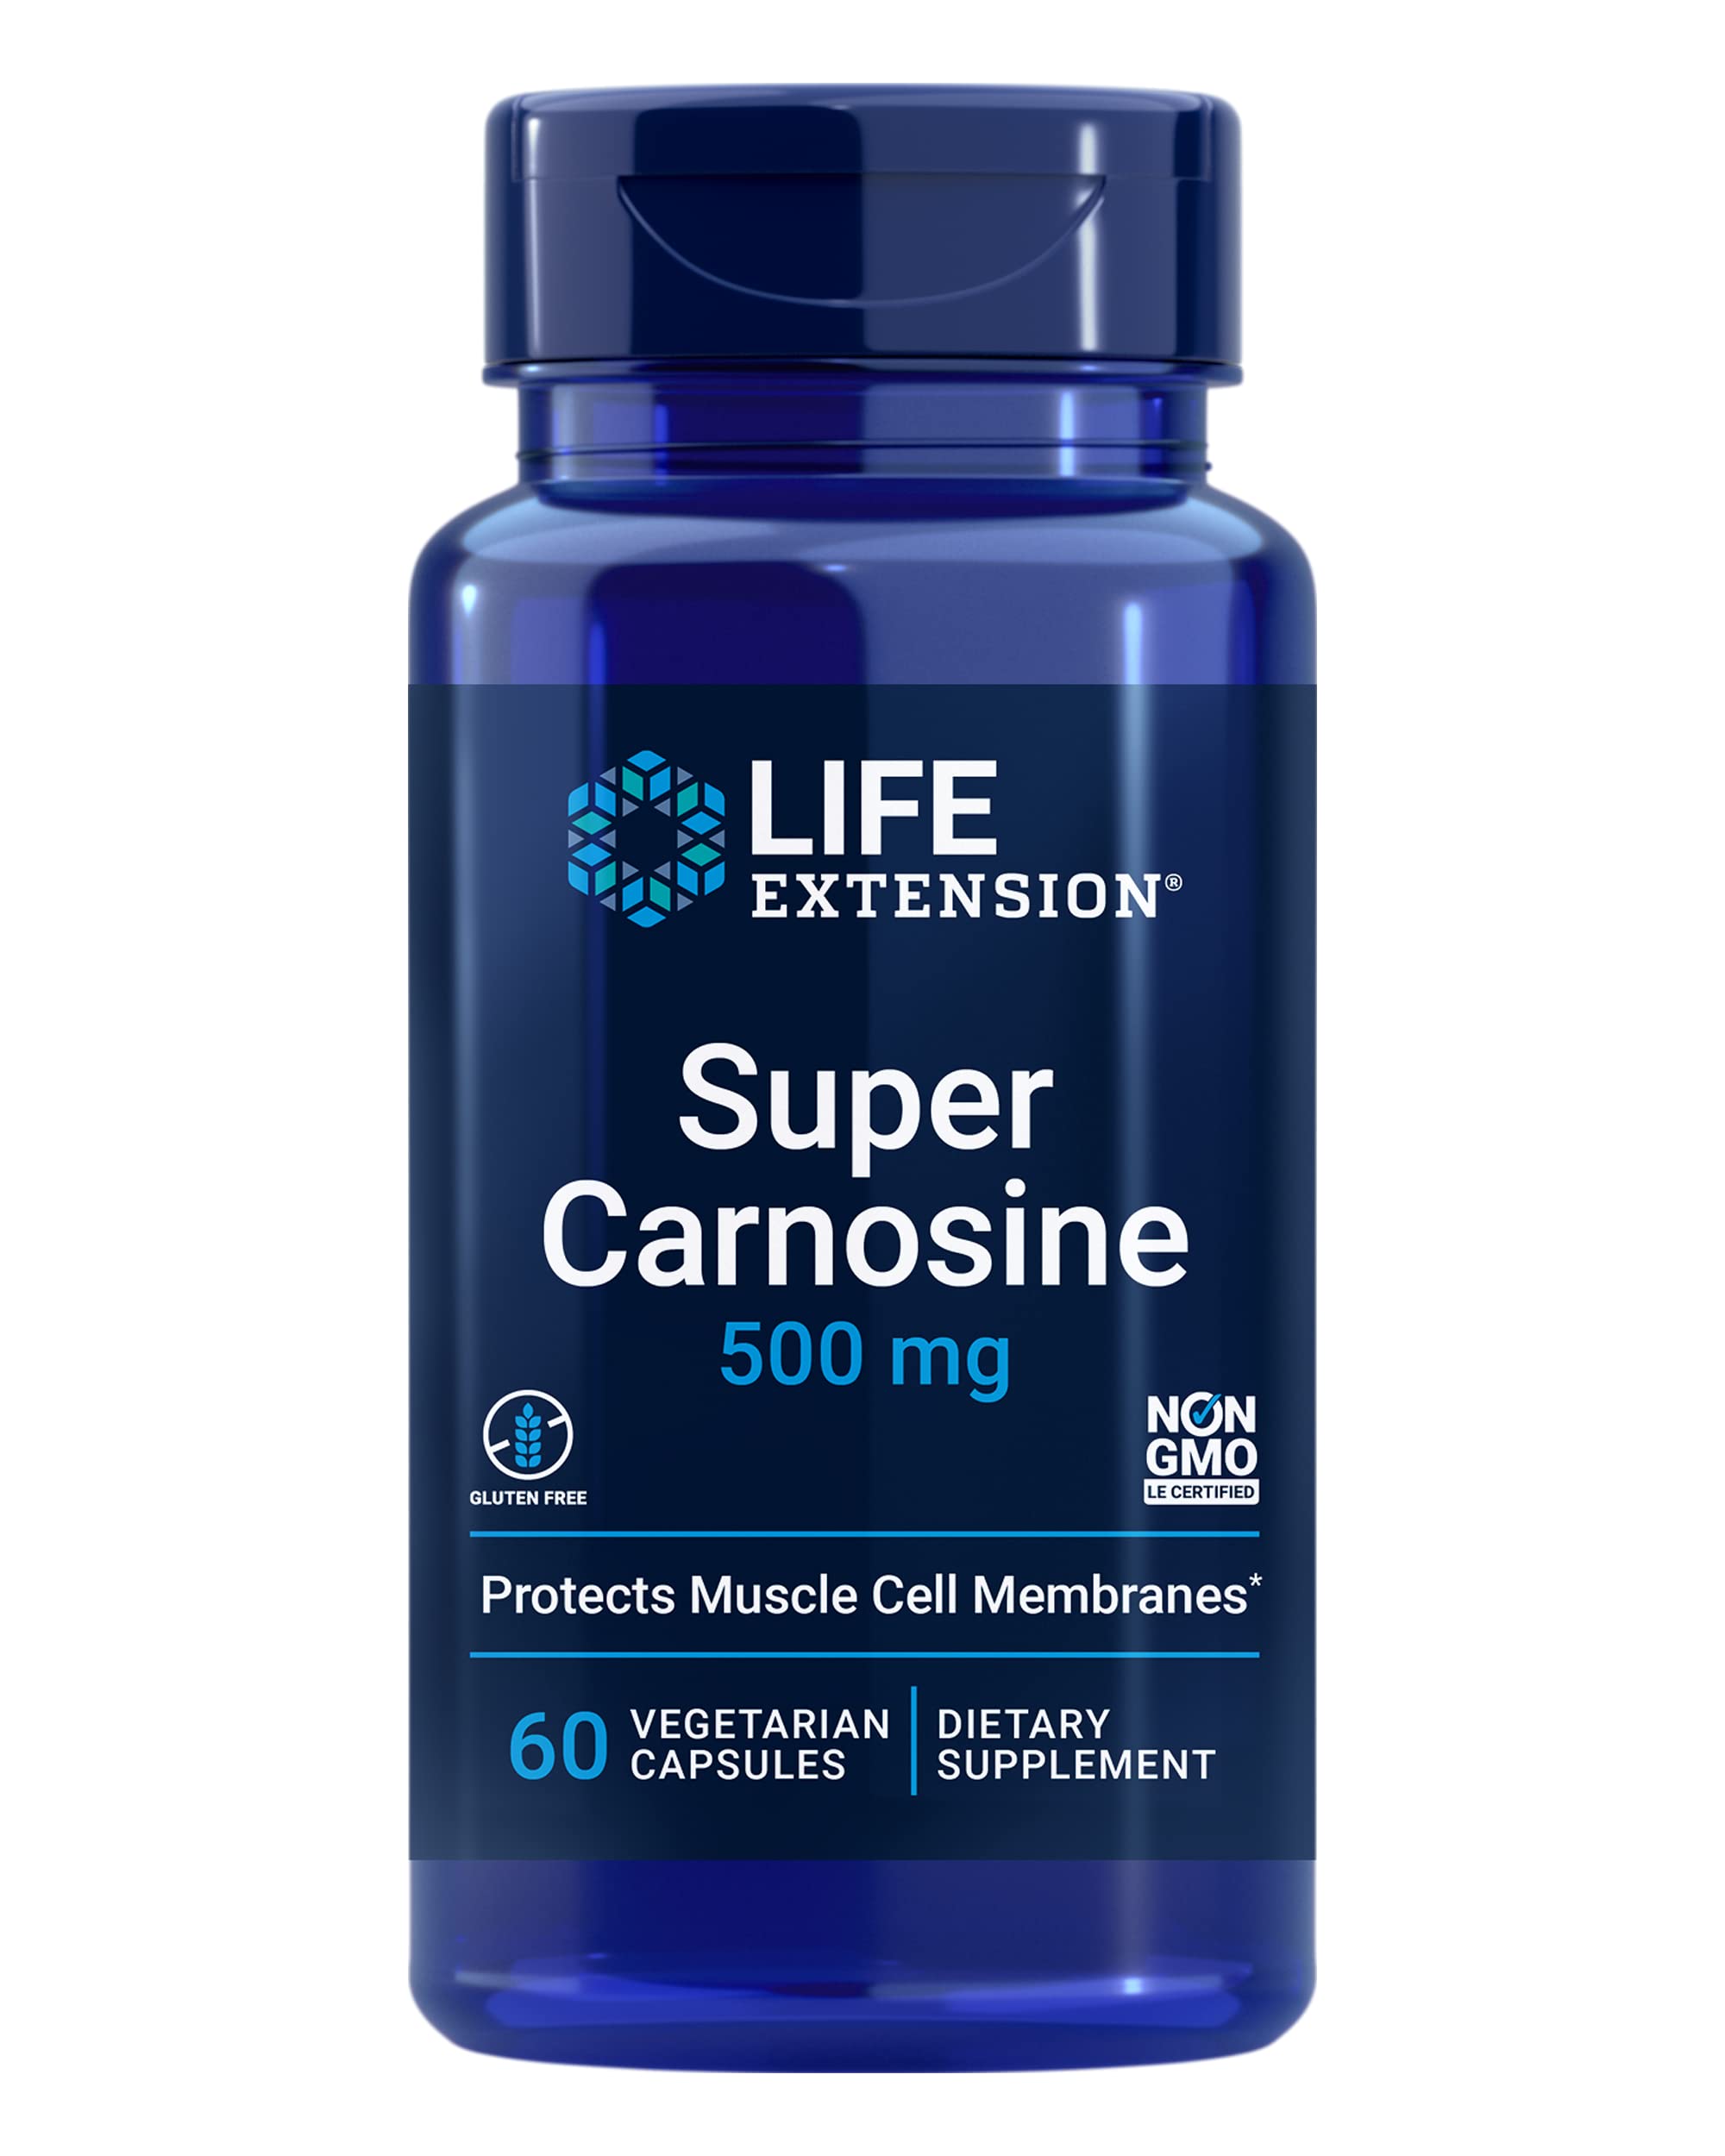 Book Cover Life Extension Super Carnosine 500mg - For Muscle Recovery - L-Carnosine Supplement with Benfotiamine, Vitamin B1, Luteolin For Healthy Aging - Non-GMO, Gluten-Free - 60 Vegetarian Capsules